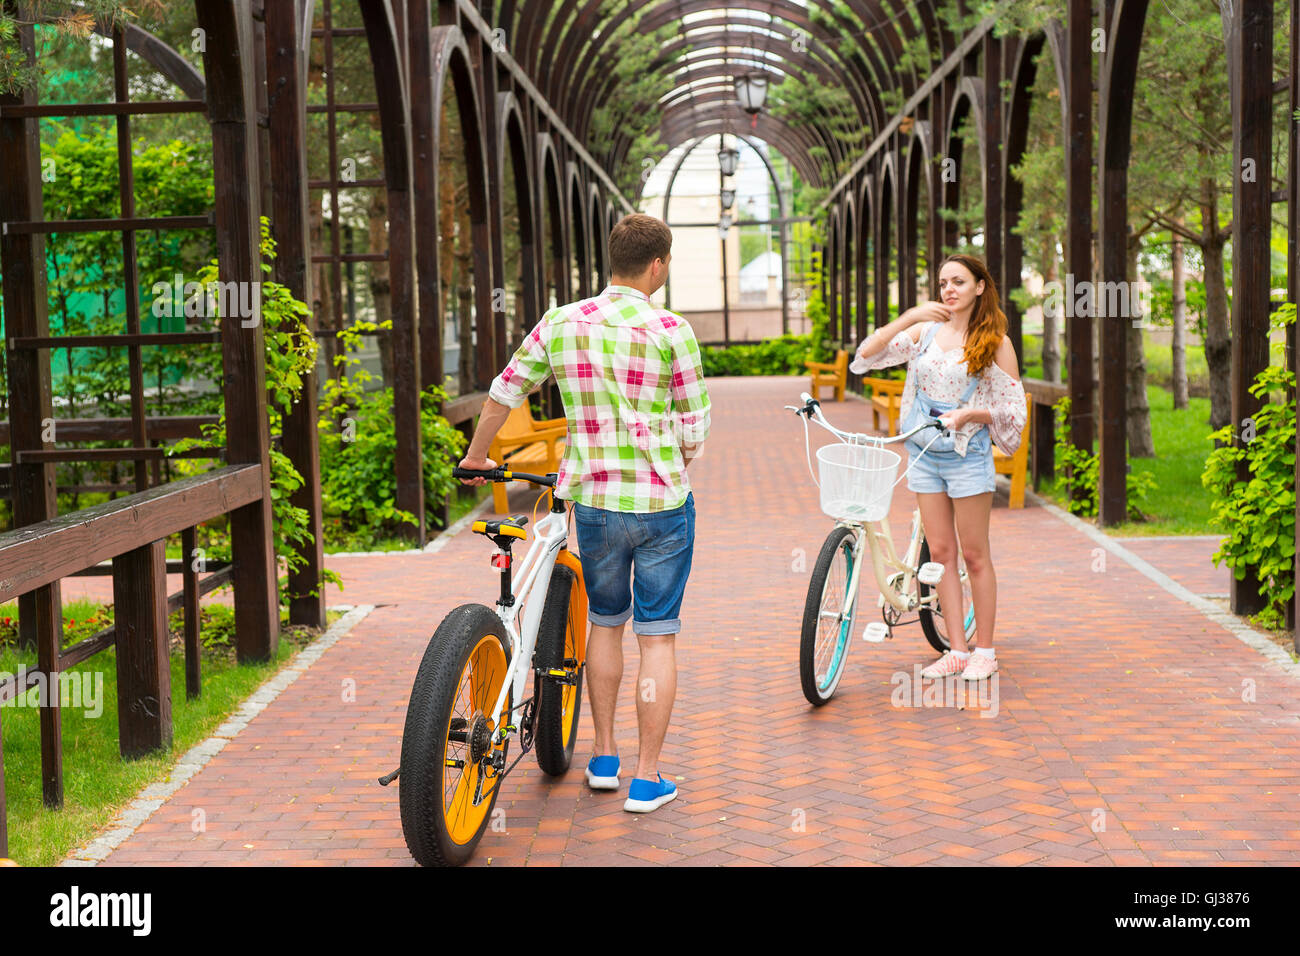 Meeting of a girl and guy in green and red plaid shirt with bikes in archway in the beautiful  park Stock Photo